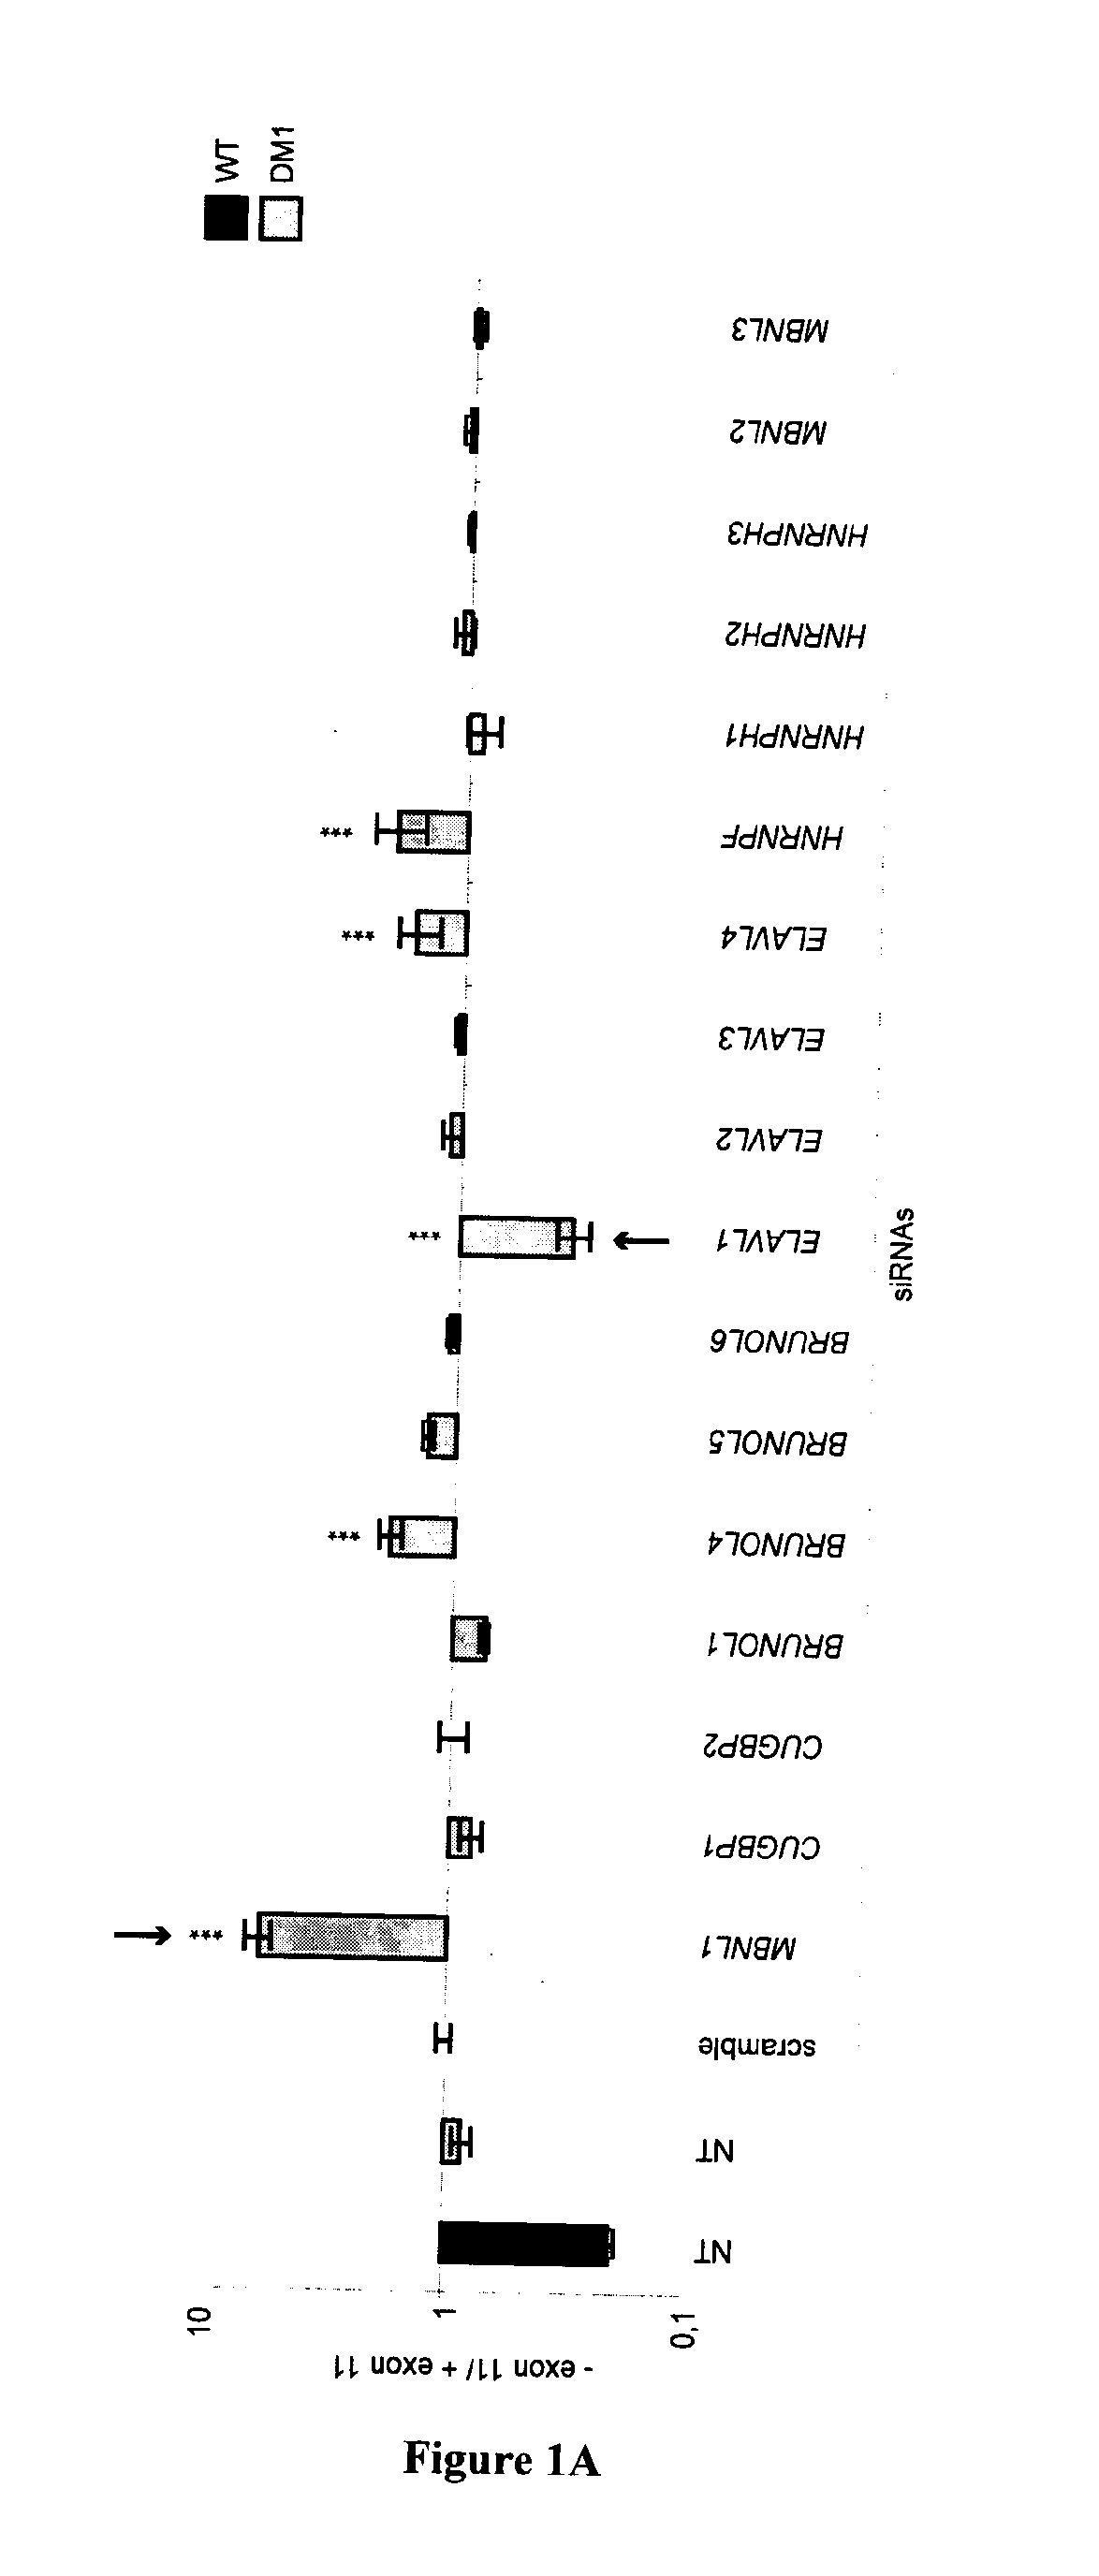 Methods and compositions comprising ampk activator (metformin/troglitazone) for the treatment of myotonic dystrophy type 1 (DM1)